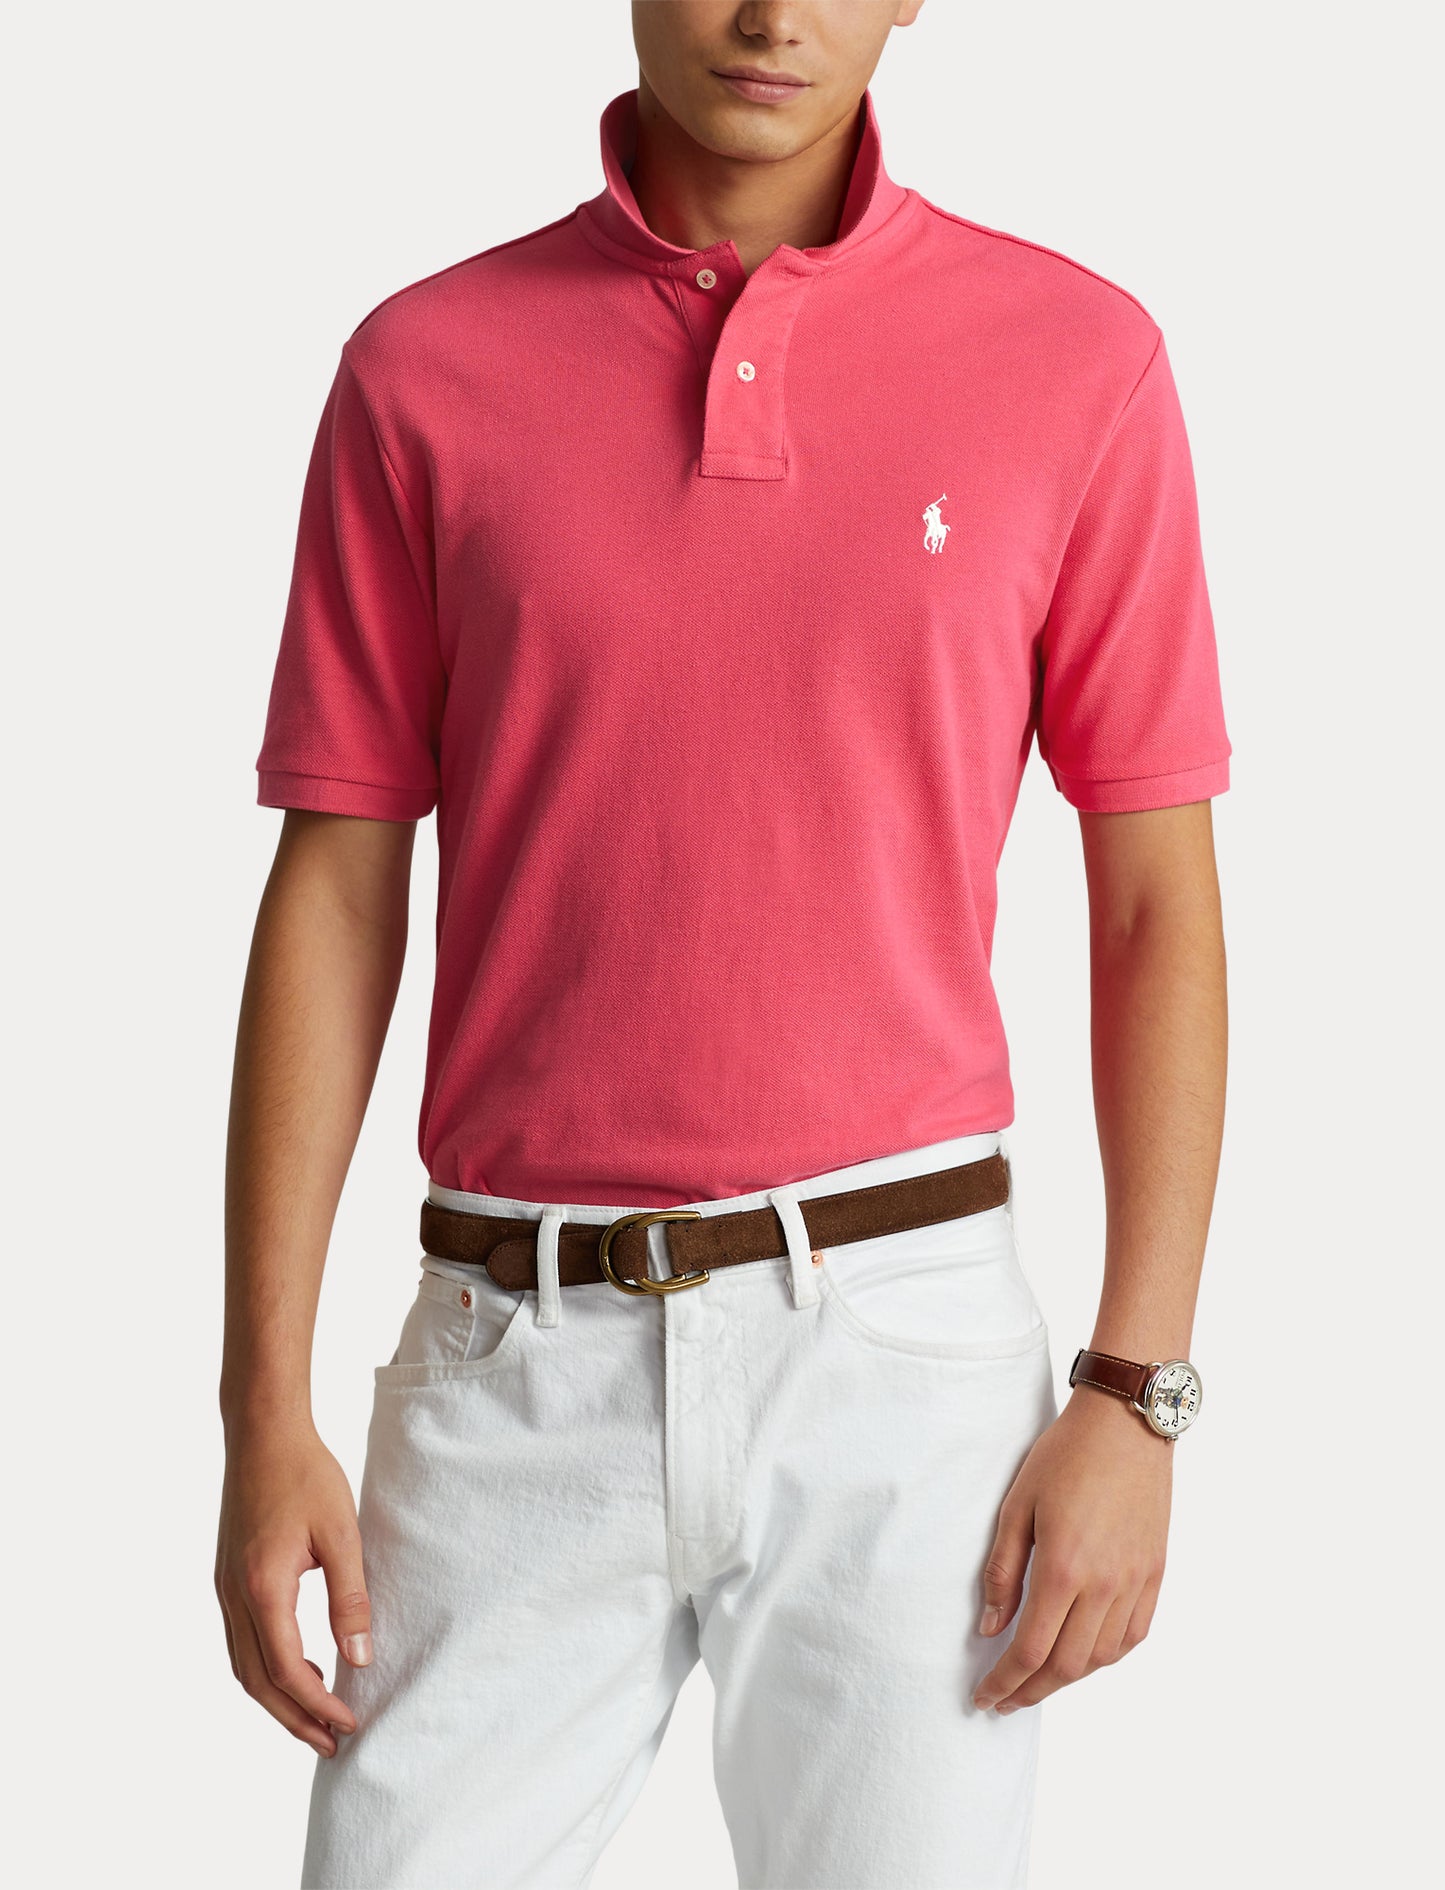 Polo Ralph Lauren Slim Fit Mesh Polo Hot Pink